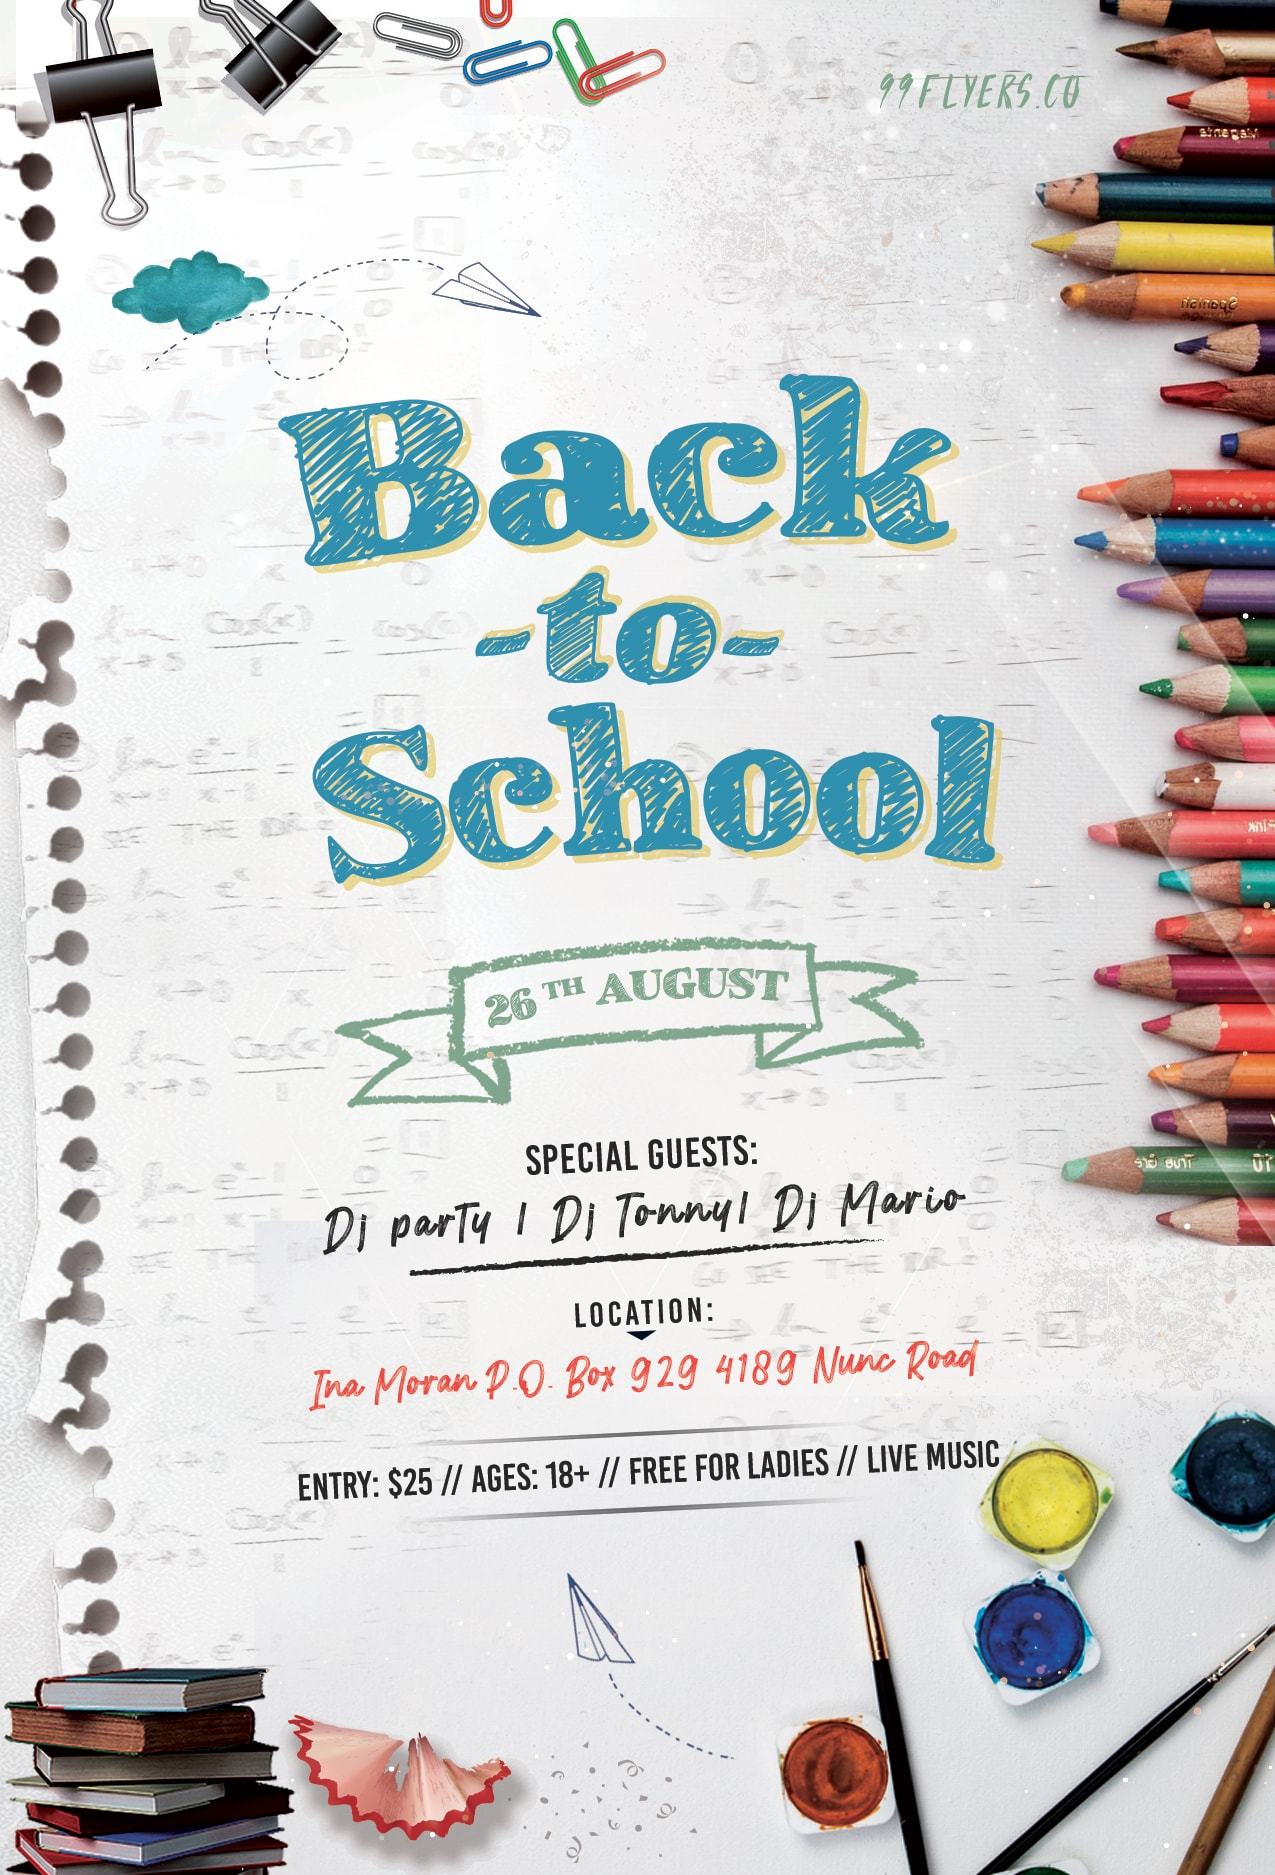 Back To School Event Flyer Free PSD Flyer  StockPSD For School Event Flyer Template Within School Event Flyer Template